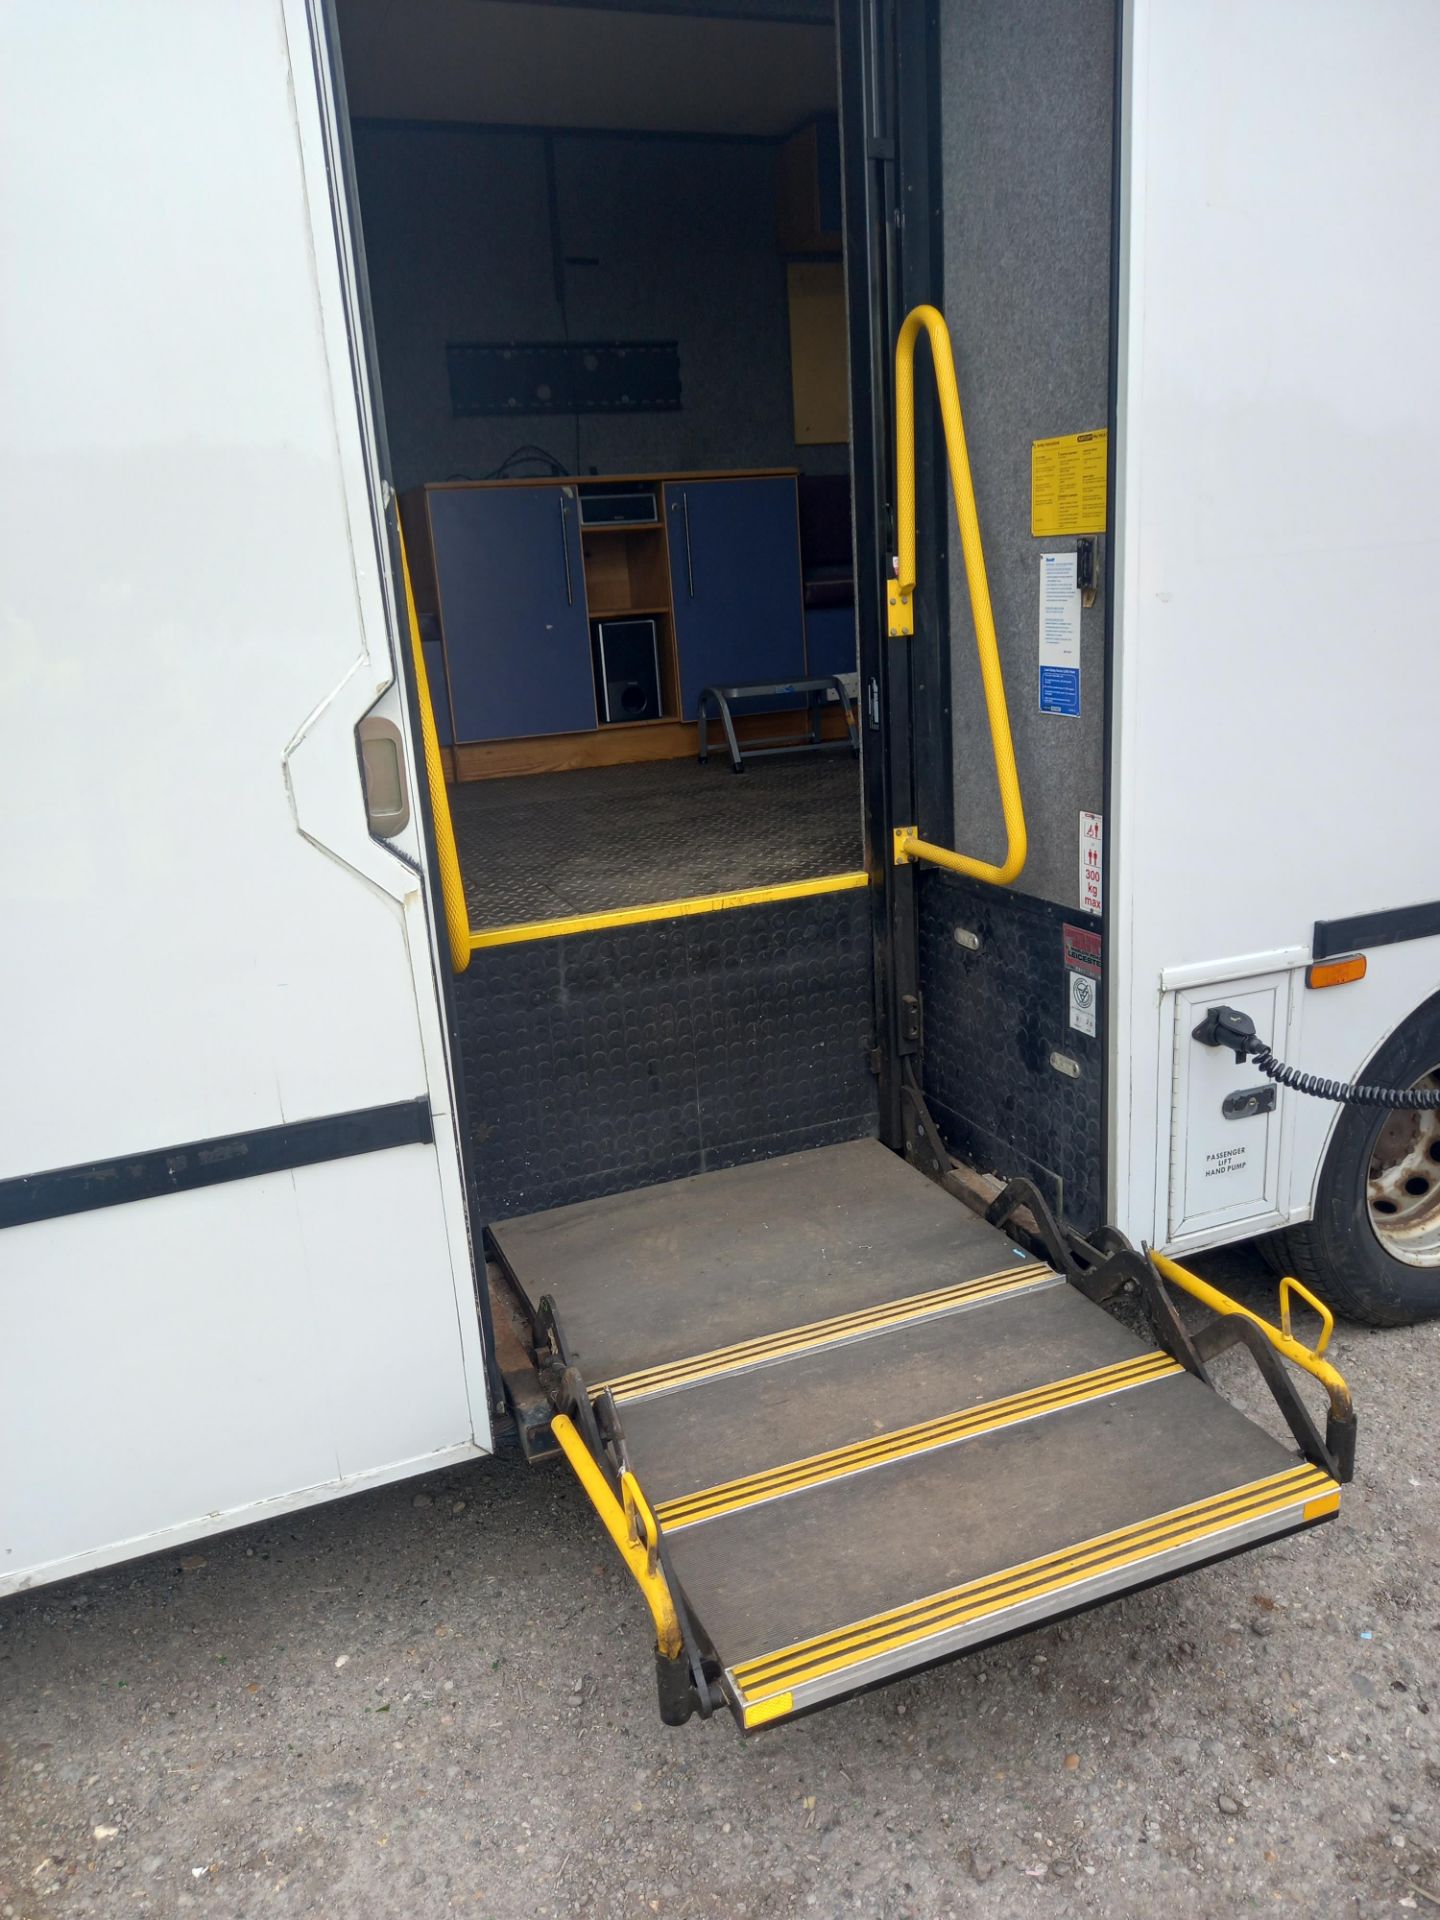 Community Outreach Vehicle/Camper Van Conversion. - Image 20 of 30